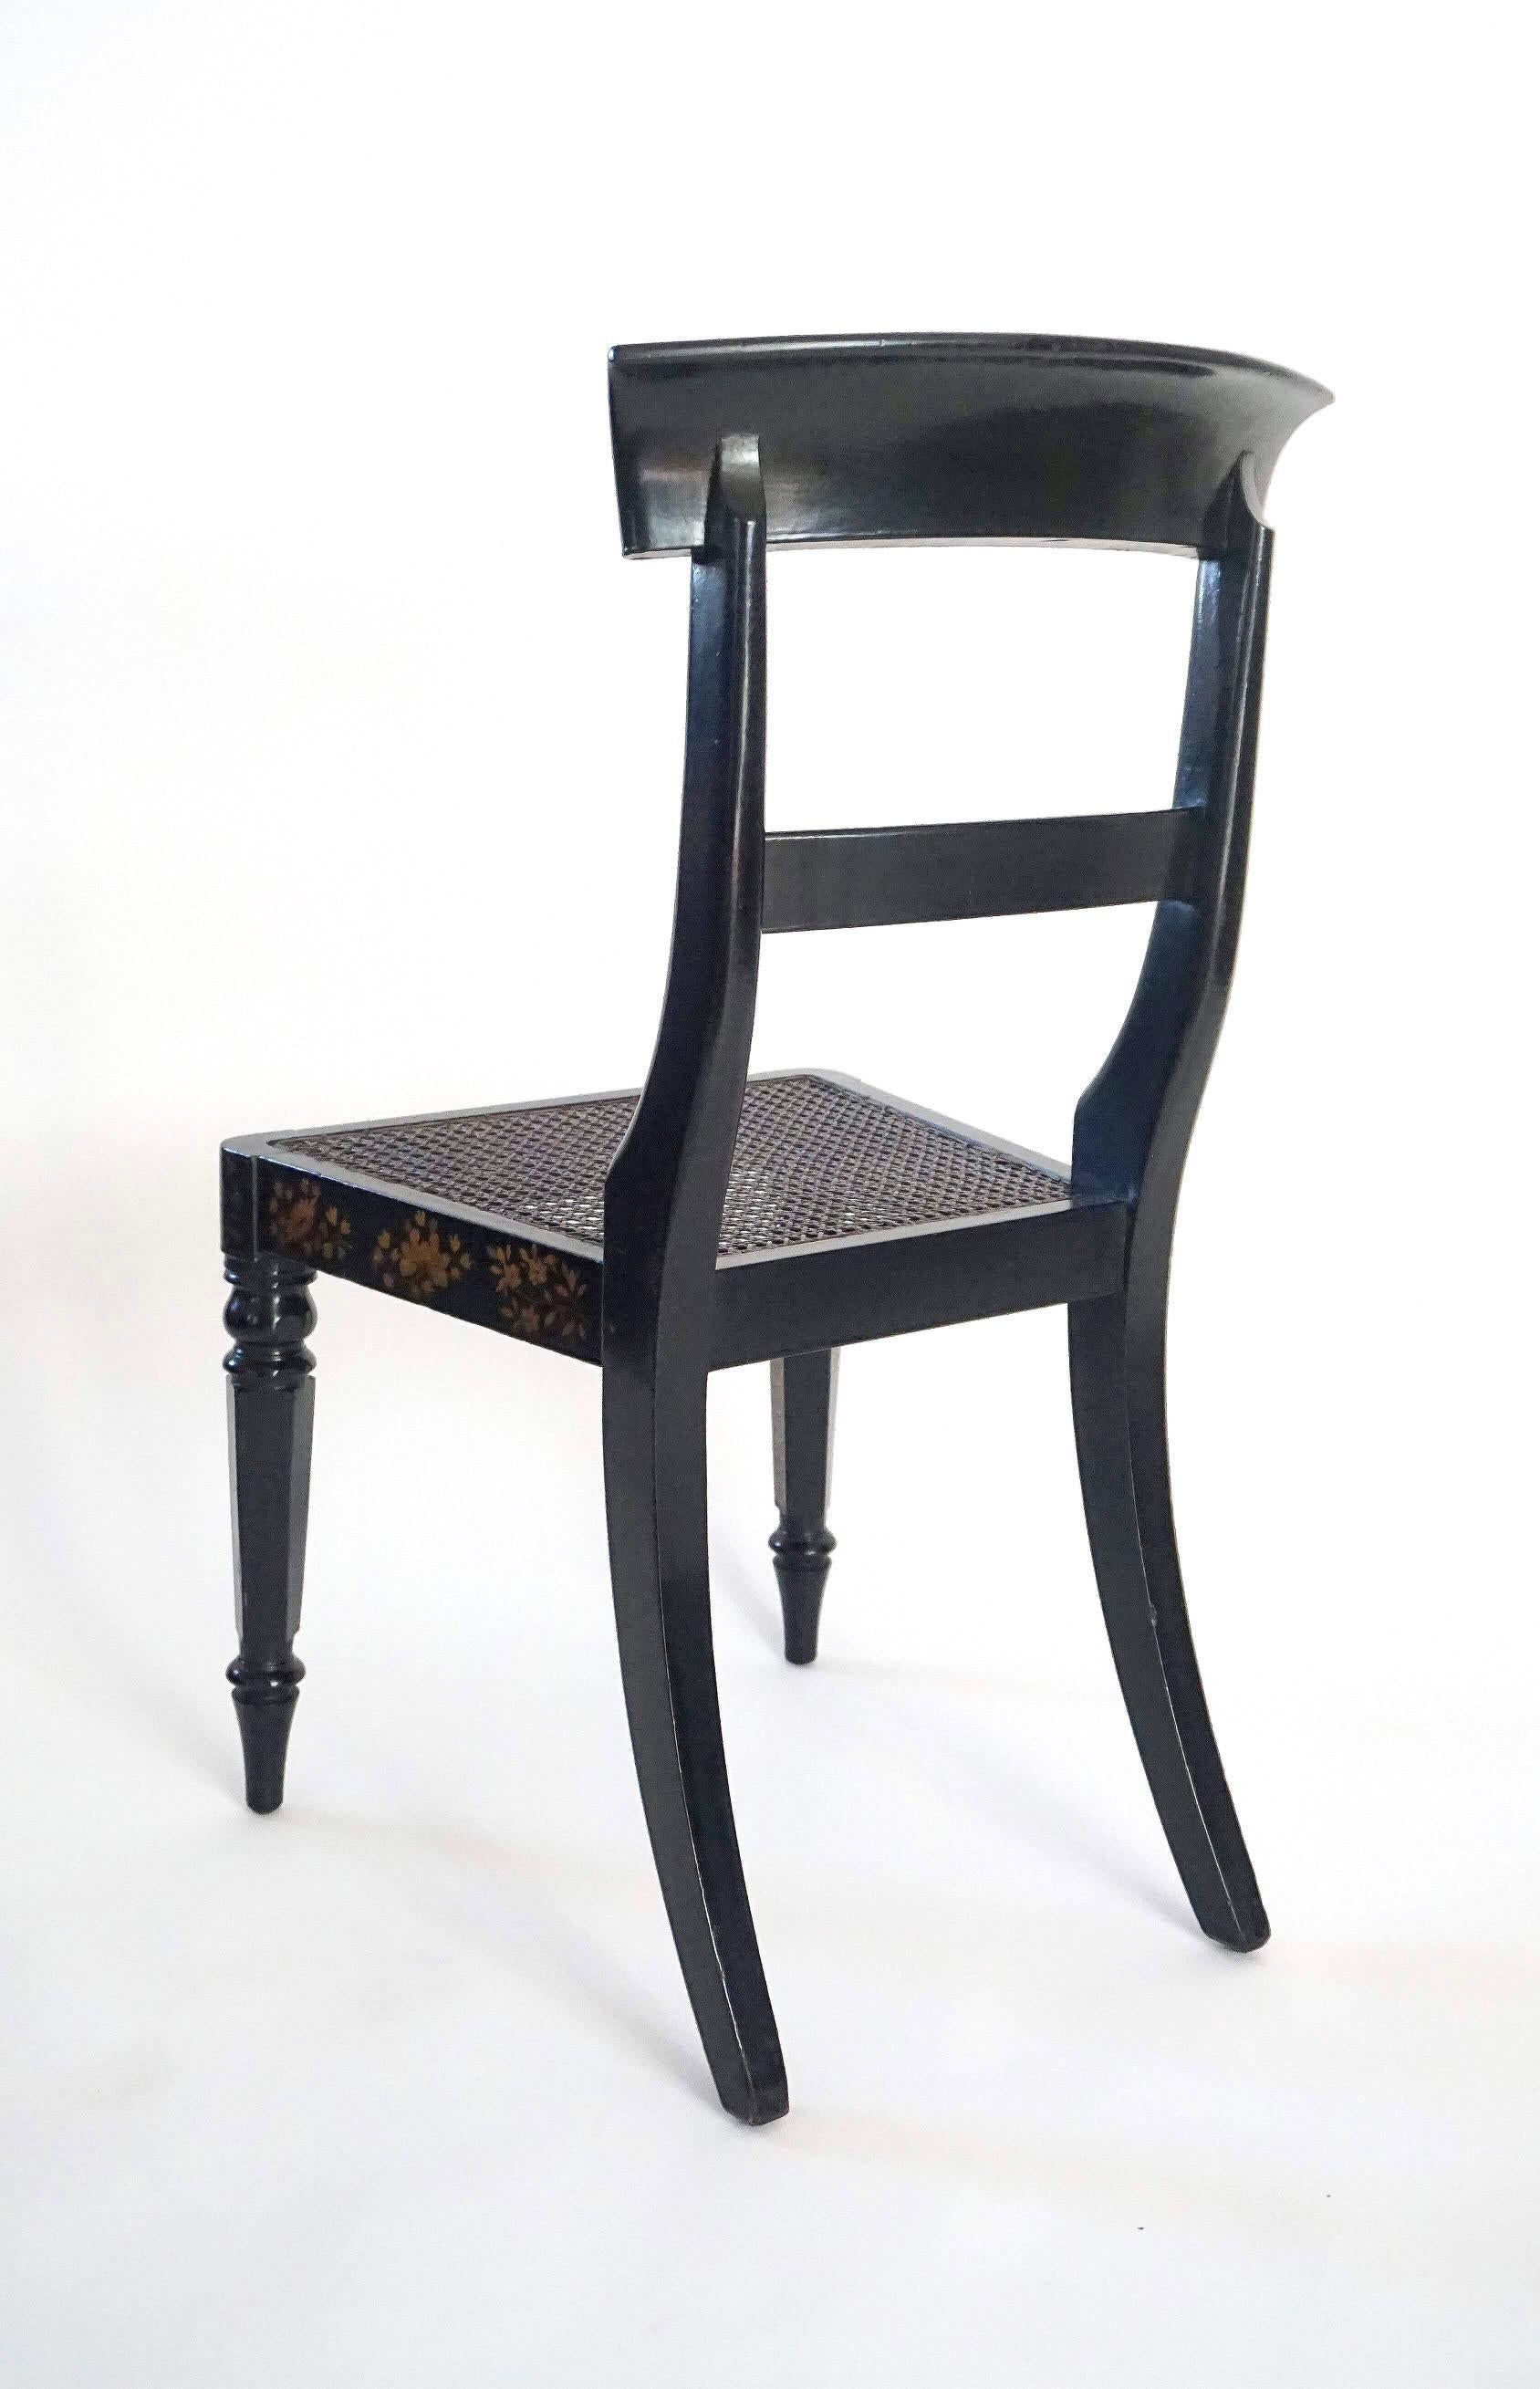 English Chinoiserie Chairs, Ex-Garvan Collection Yale University, circa 1835 For Sale 7